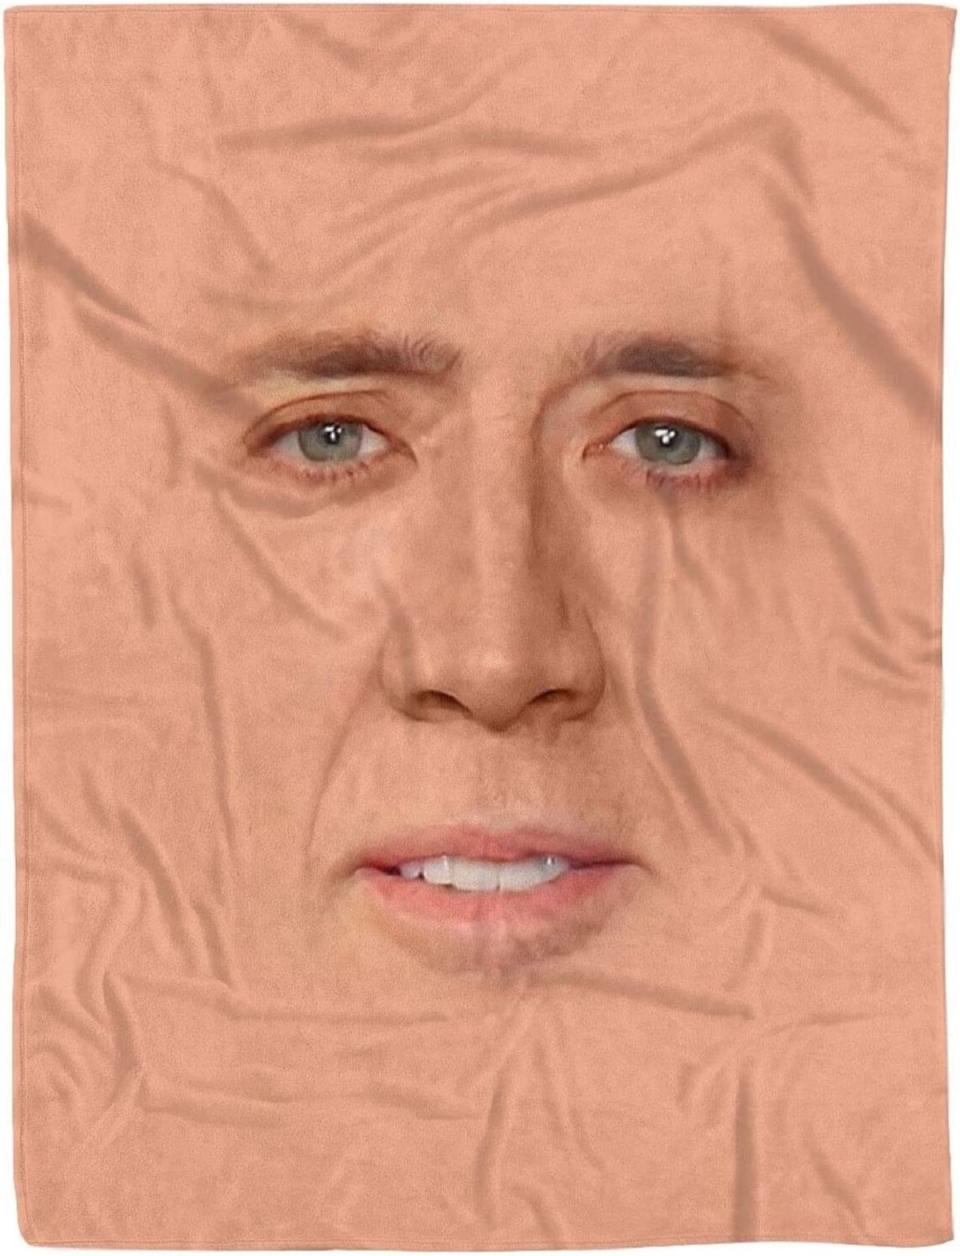 Ncolas Cage face stretching blanket